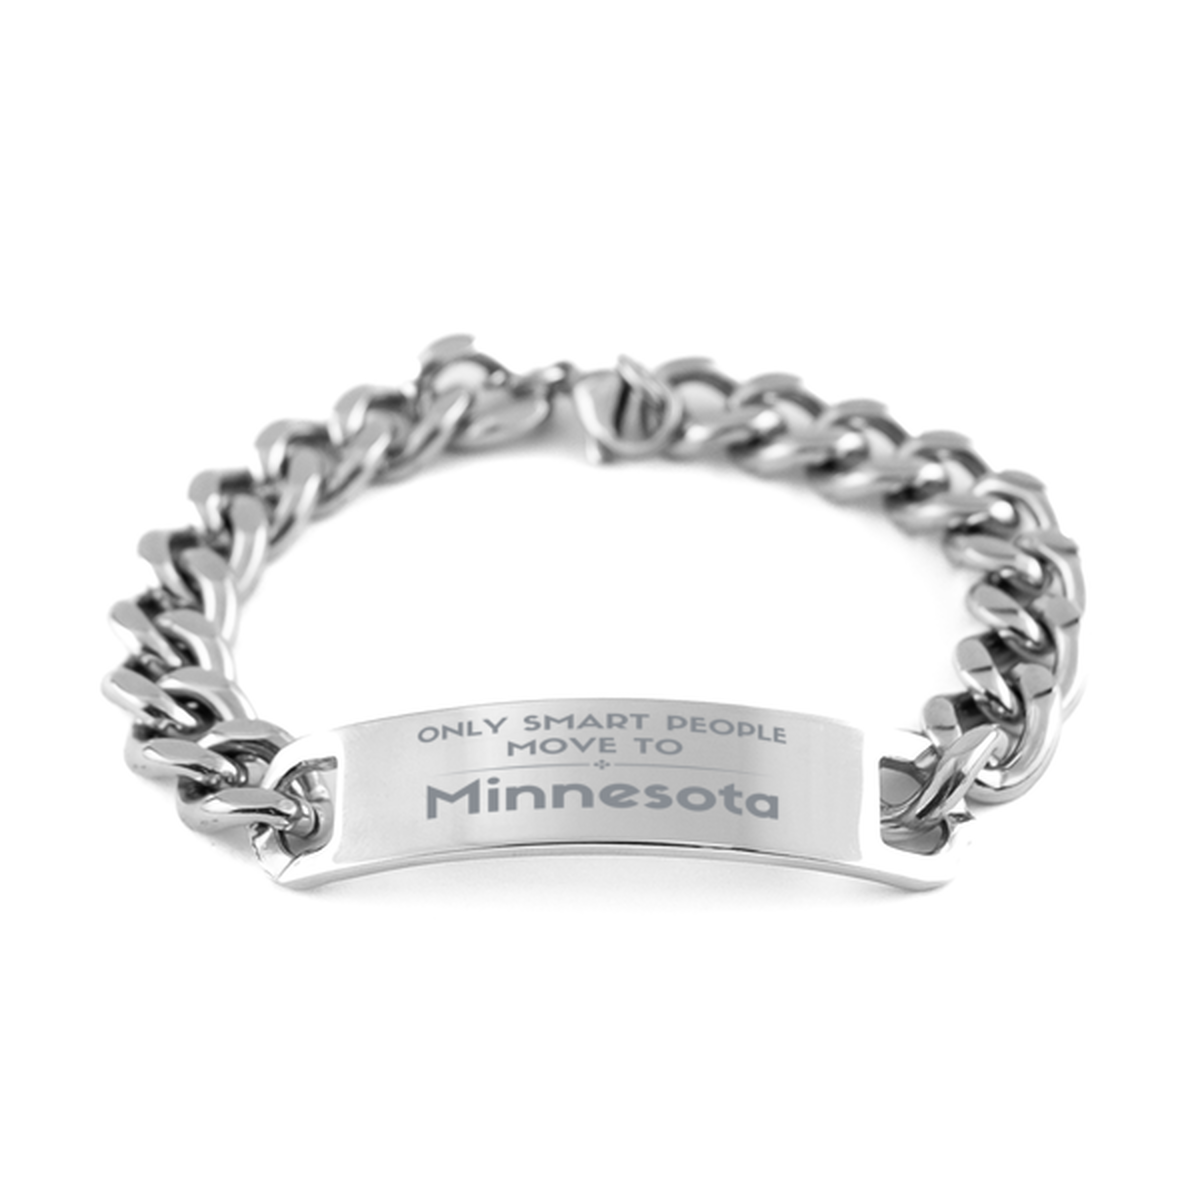 Only smart people move to Minnesota Cuban Chain Stainless Steel Bracelet, Gag Gifts For Minnesota, Move to Minnesota Gifts for Friends Coworker Funny Saying Quote